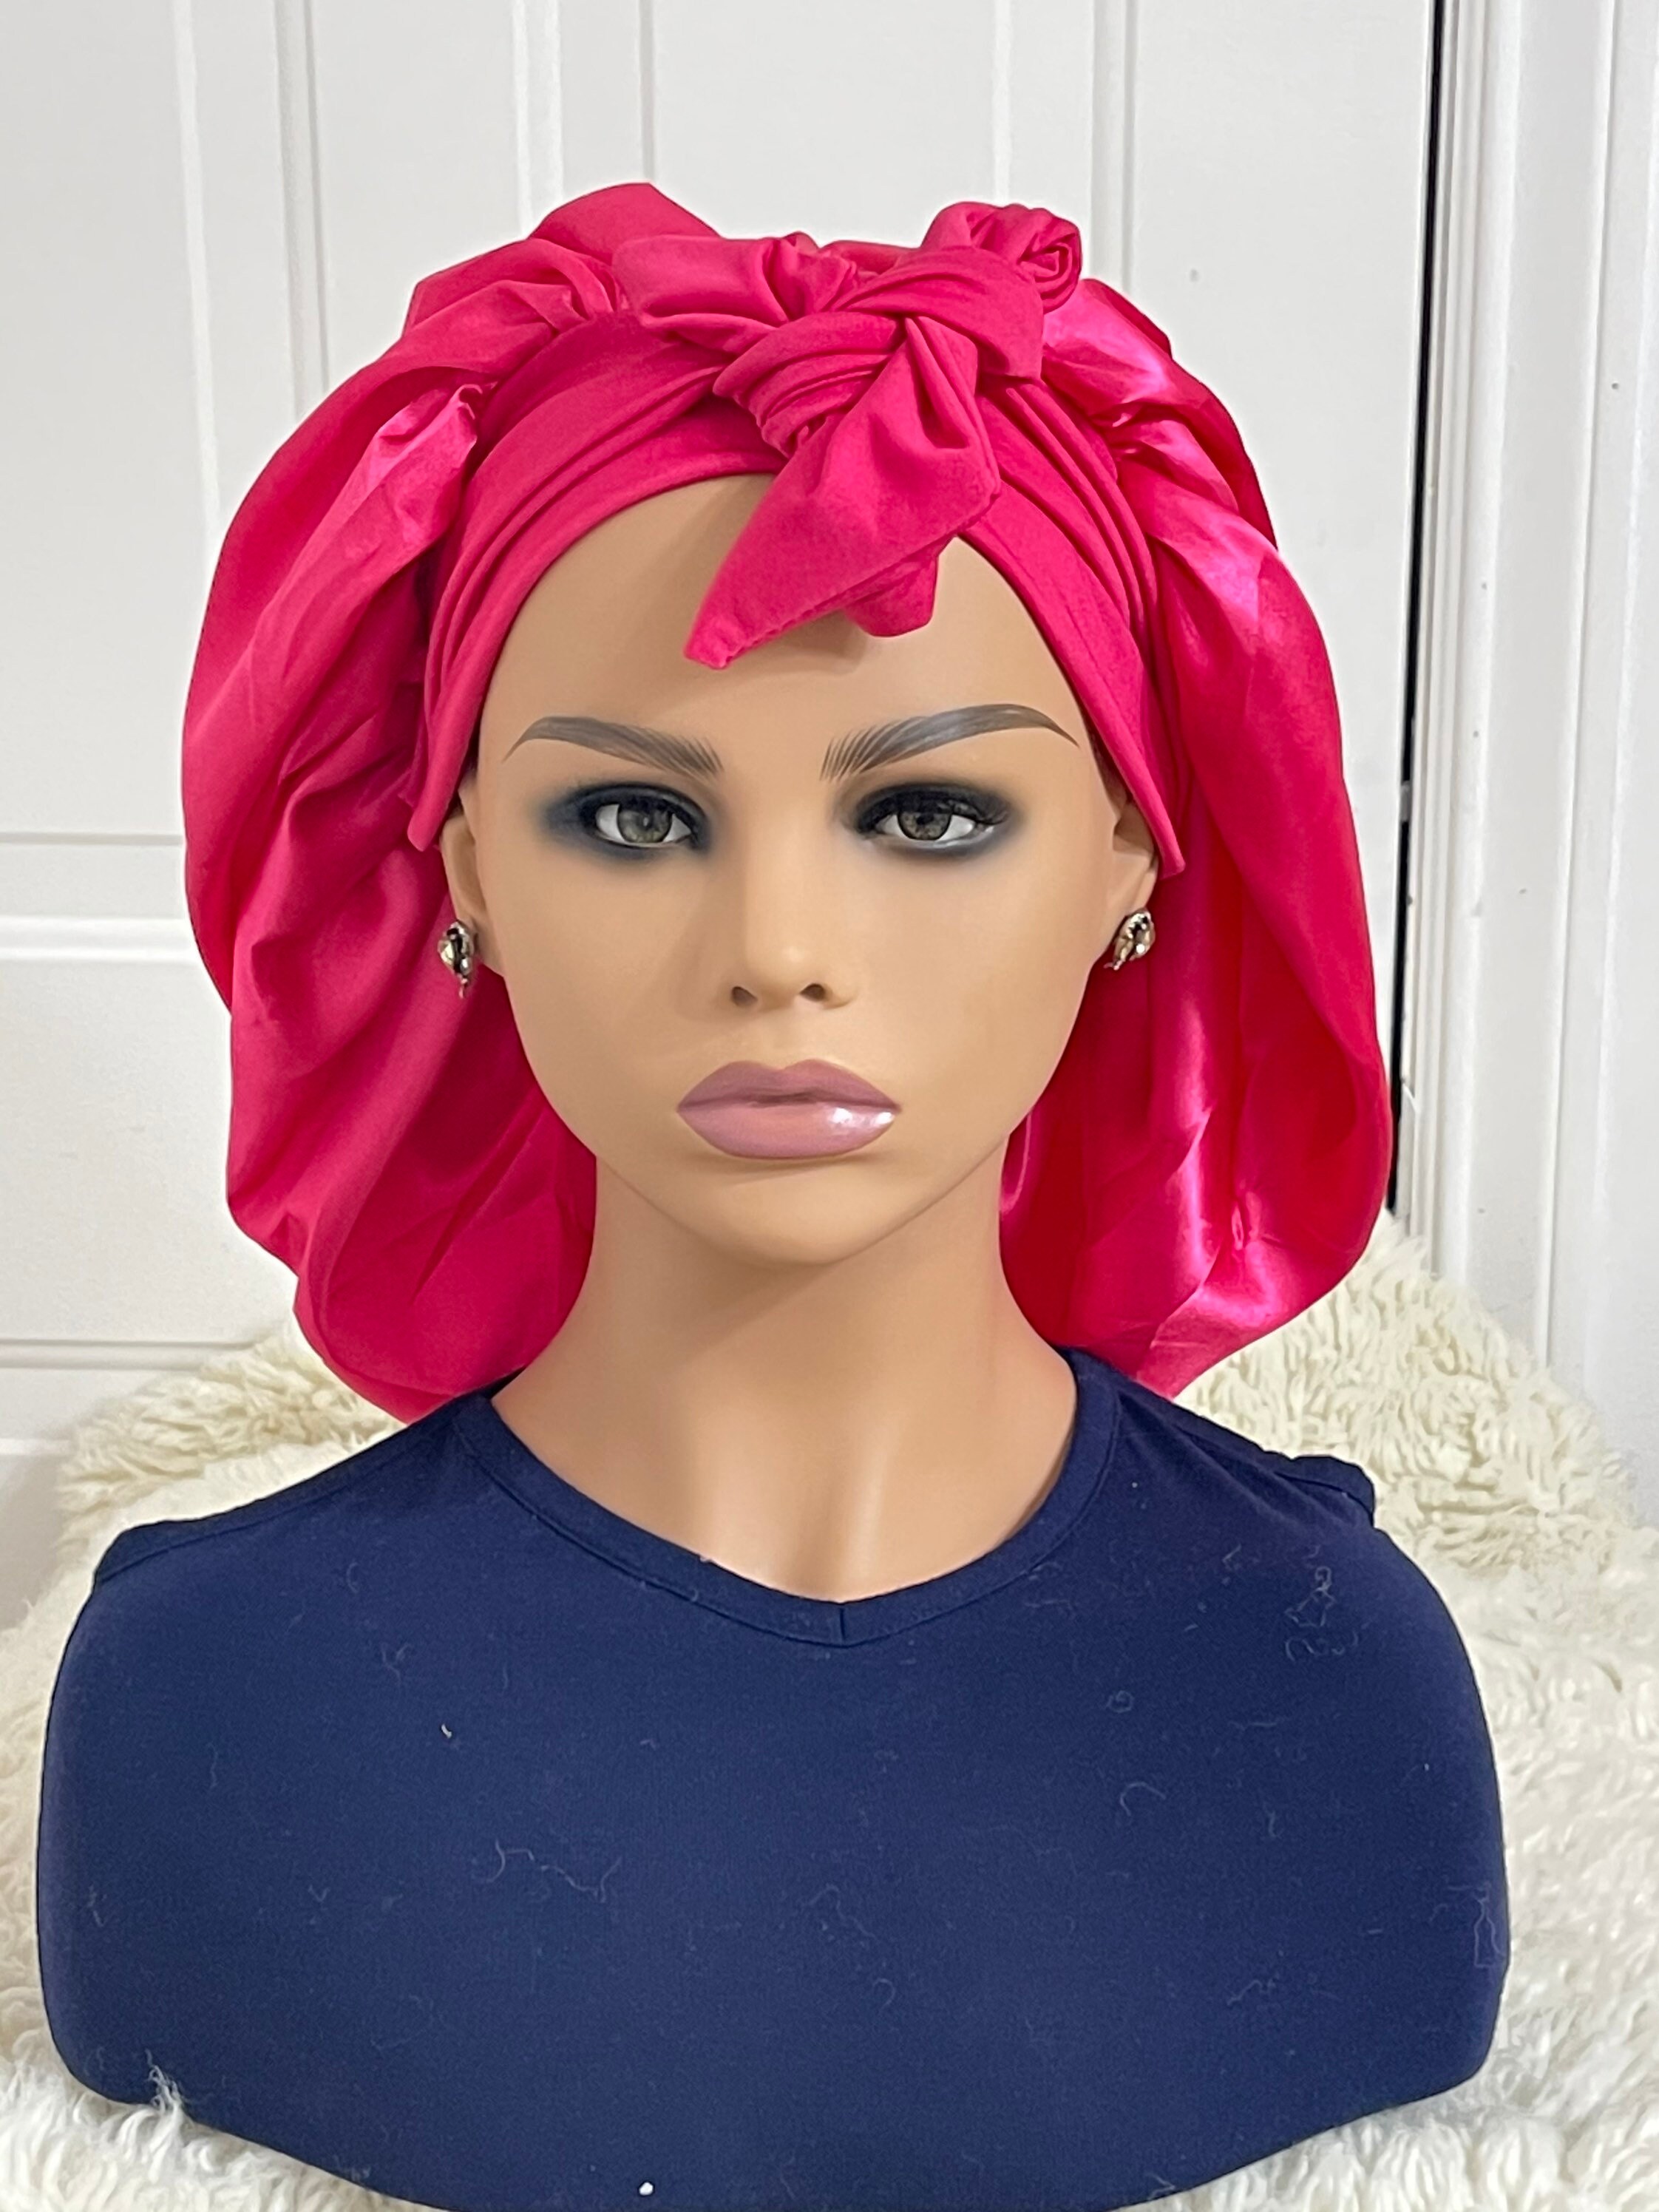 XL SATIN HAIR Bonnet with adjustable stretch ties for Natural | Etsy